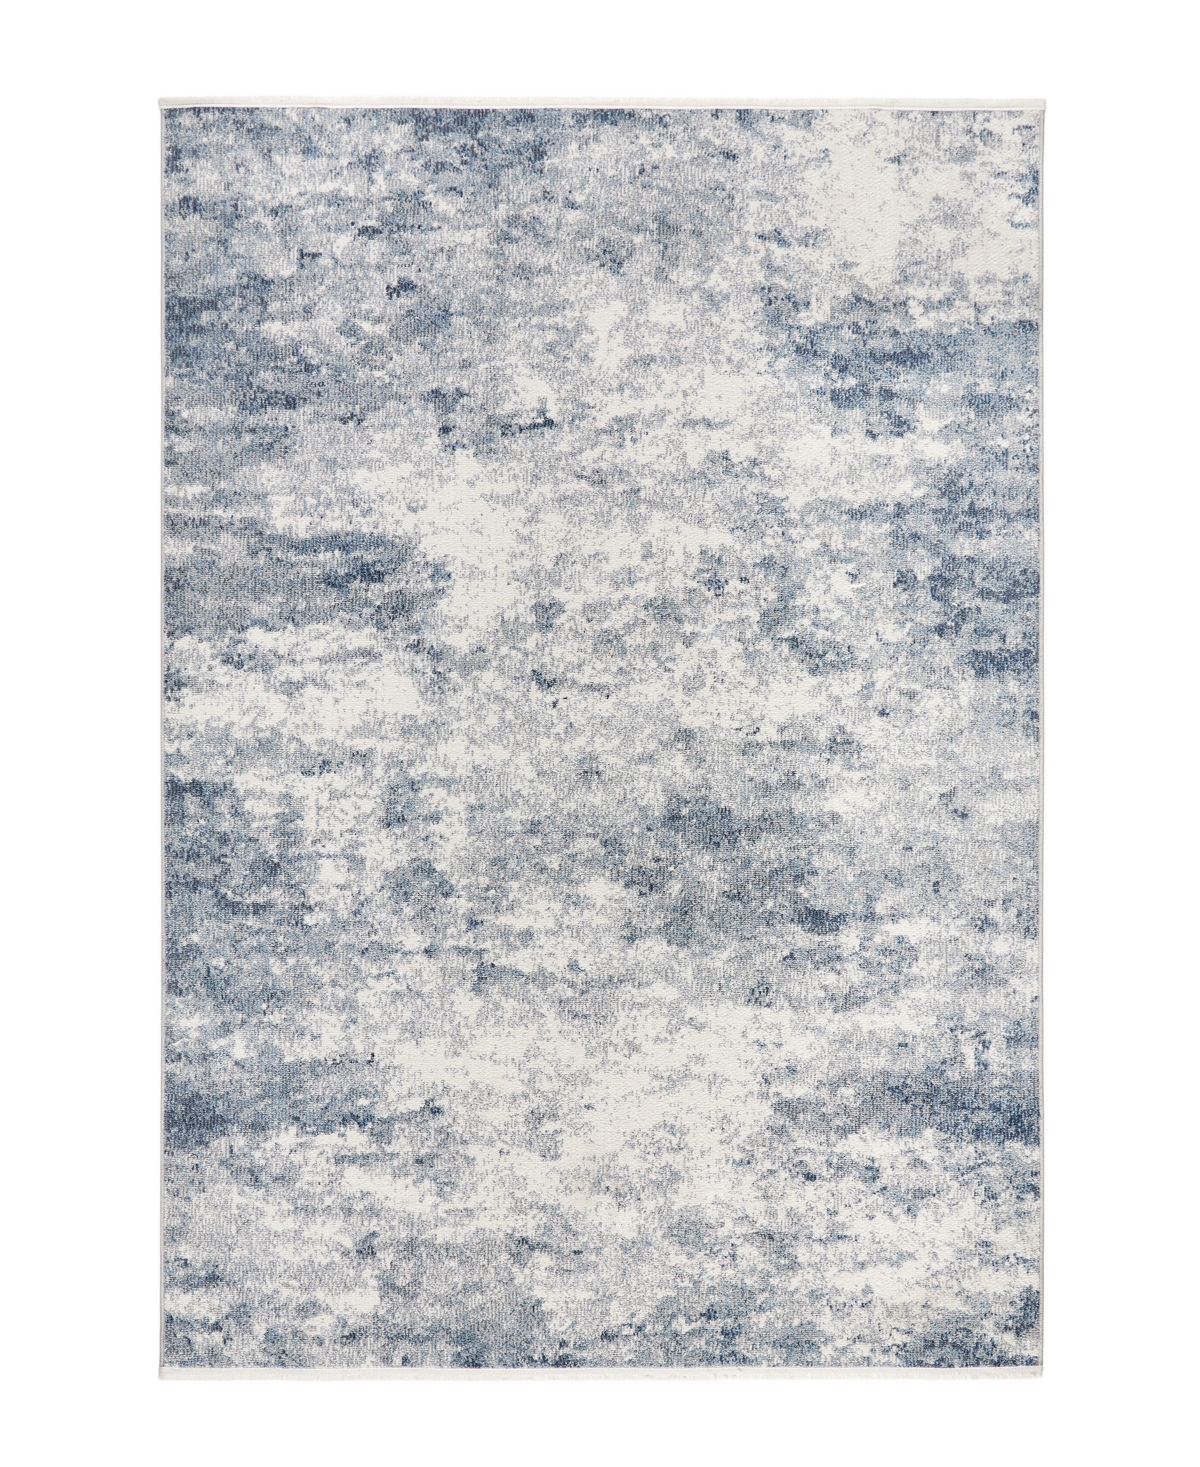 Town & Country Living Everyday Rein Everwash 12 5'2" X 7'2" Area Rug In Blue,gray